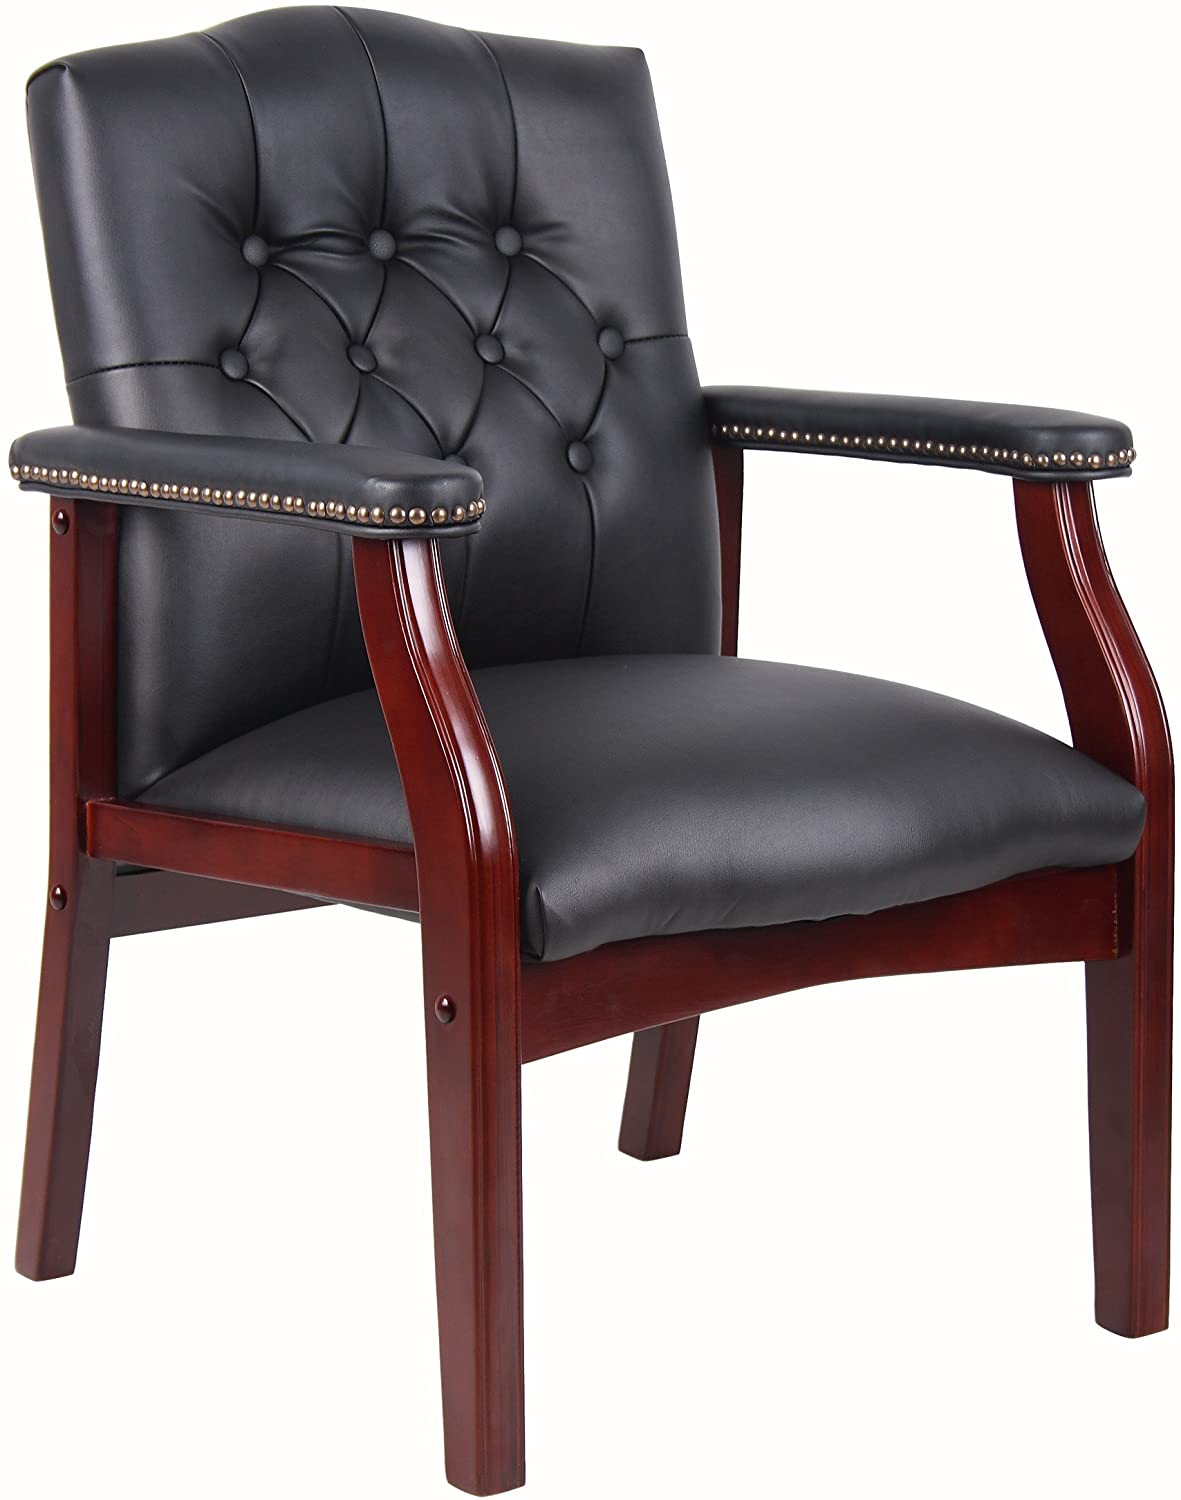 Boss Office Products Ivy League Executive Guest Chair in Black